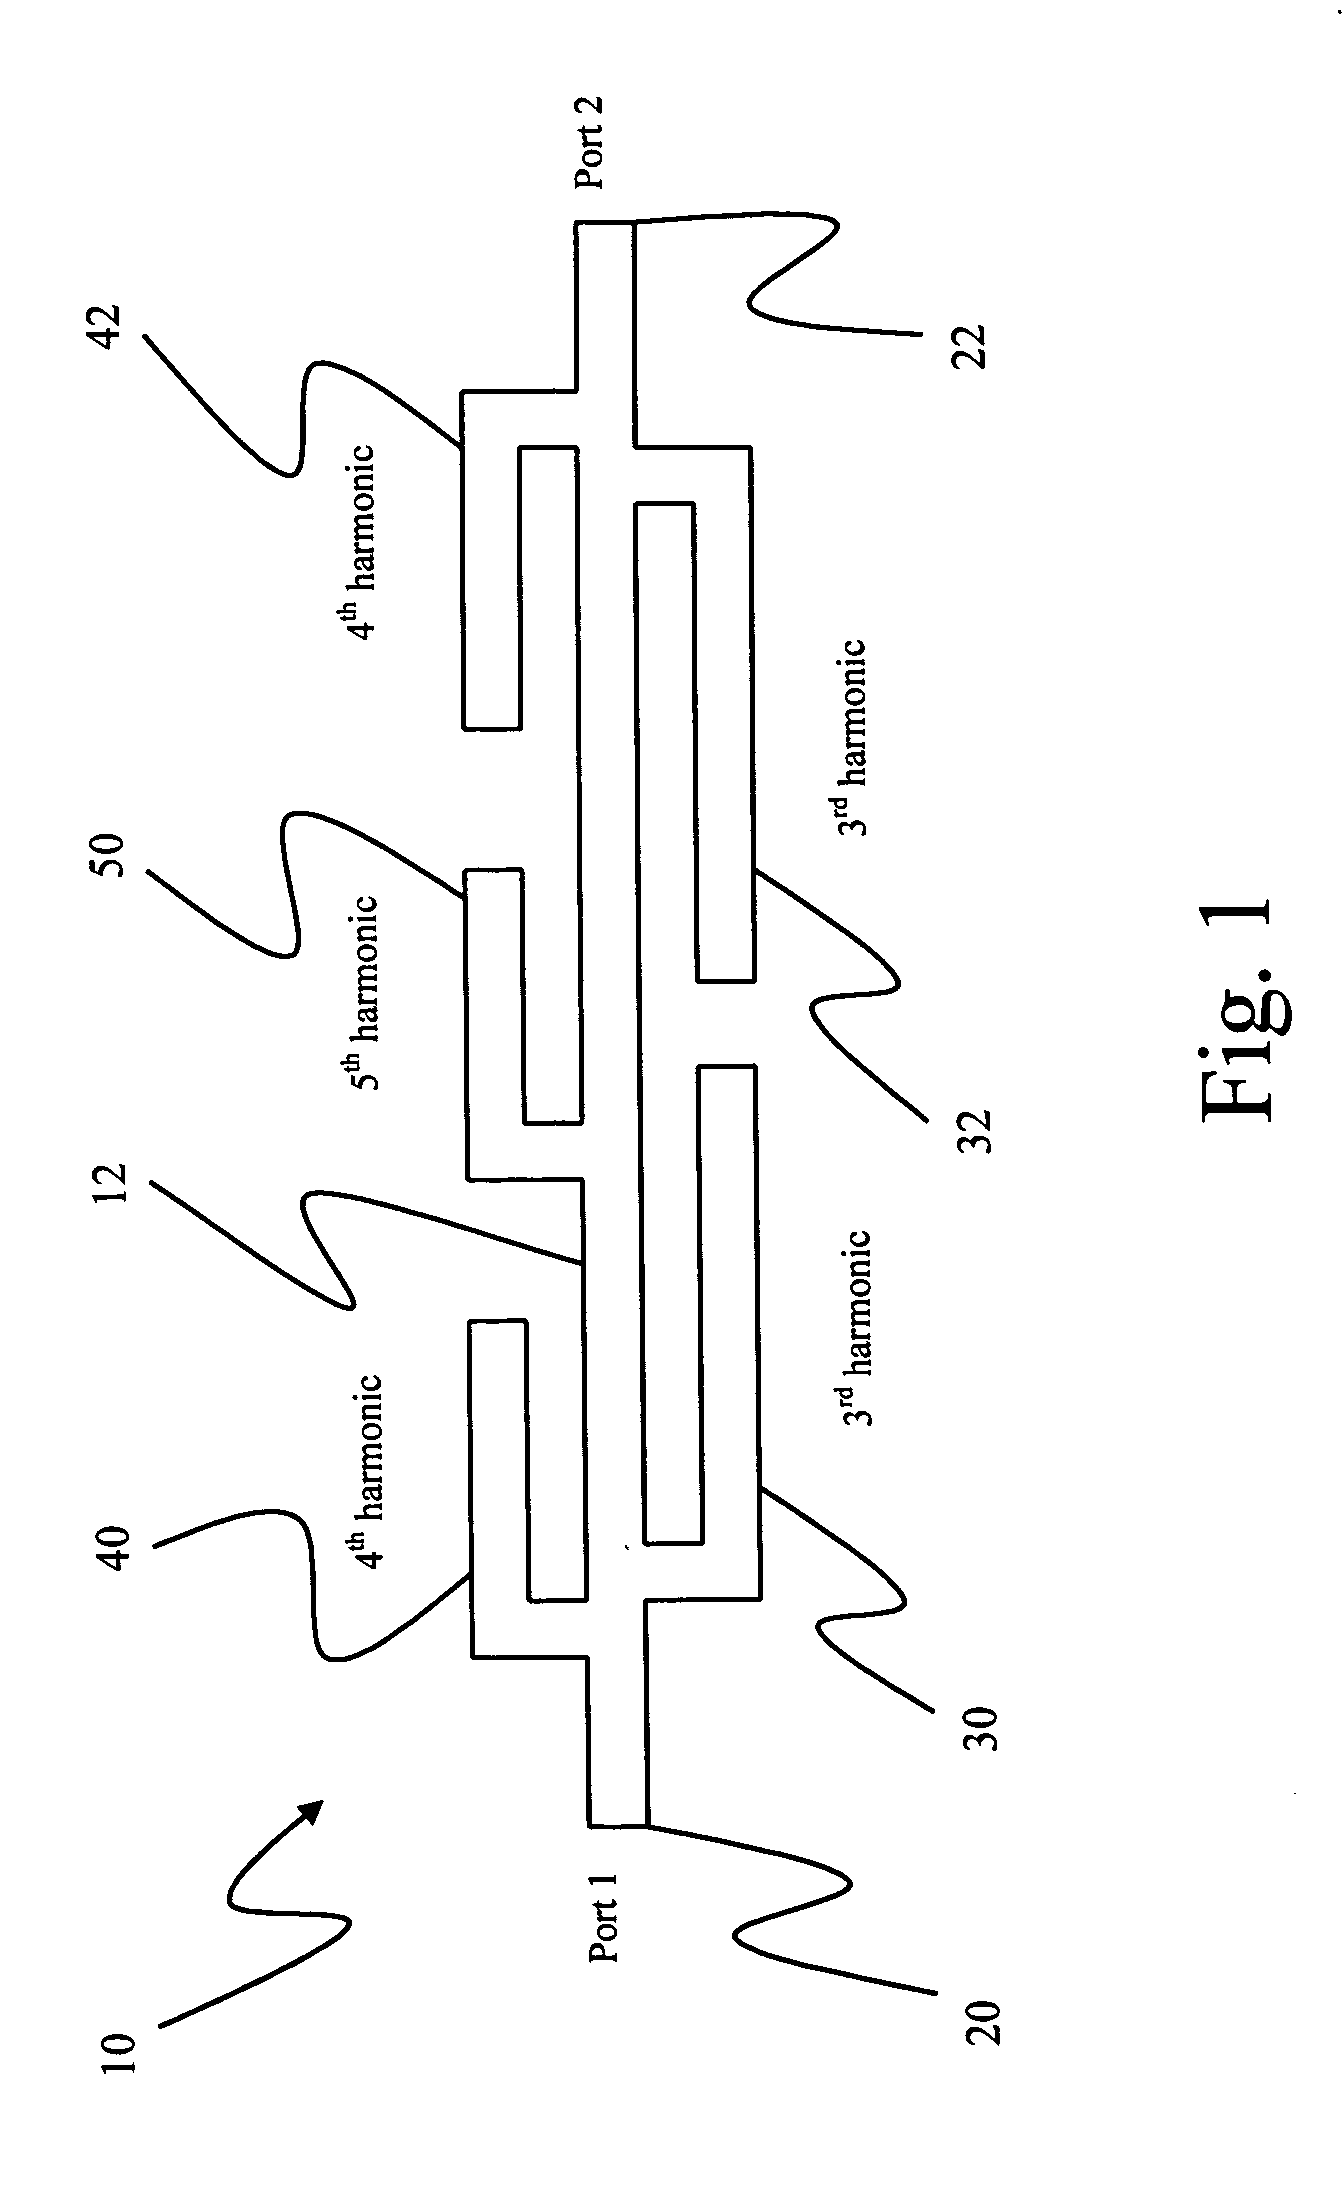 Embedded antenna and filter apparatus and methodology